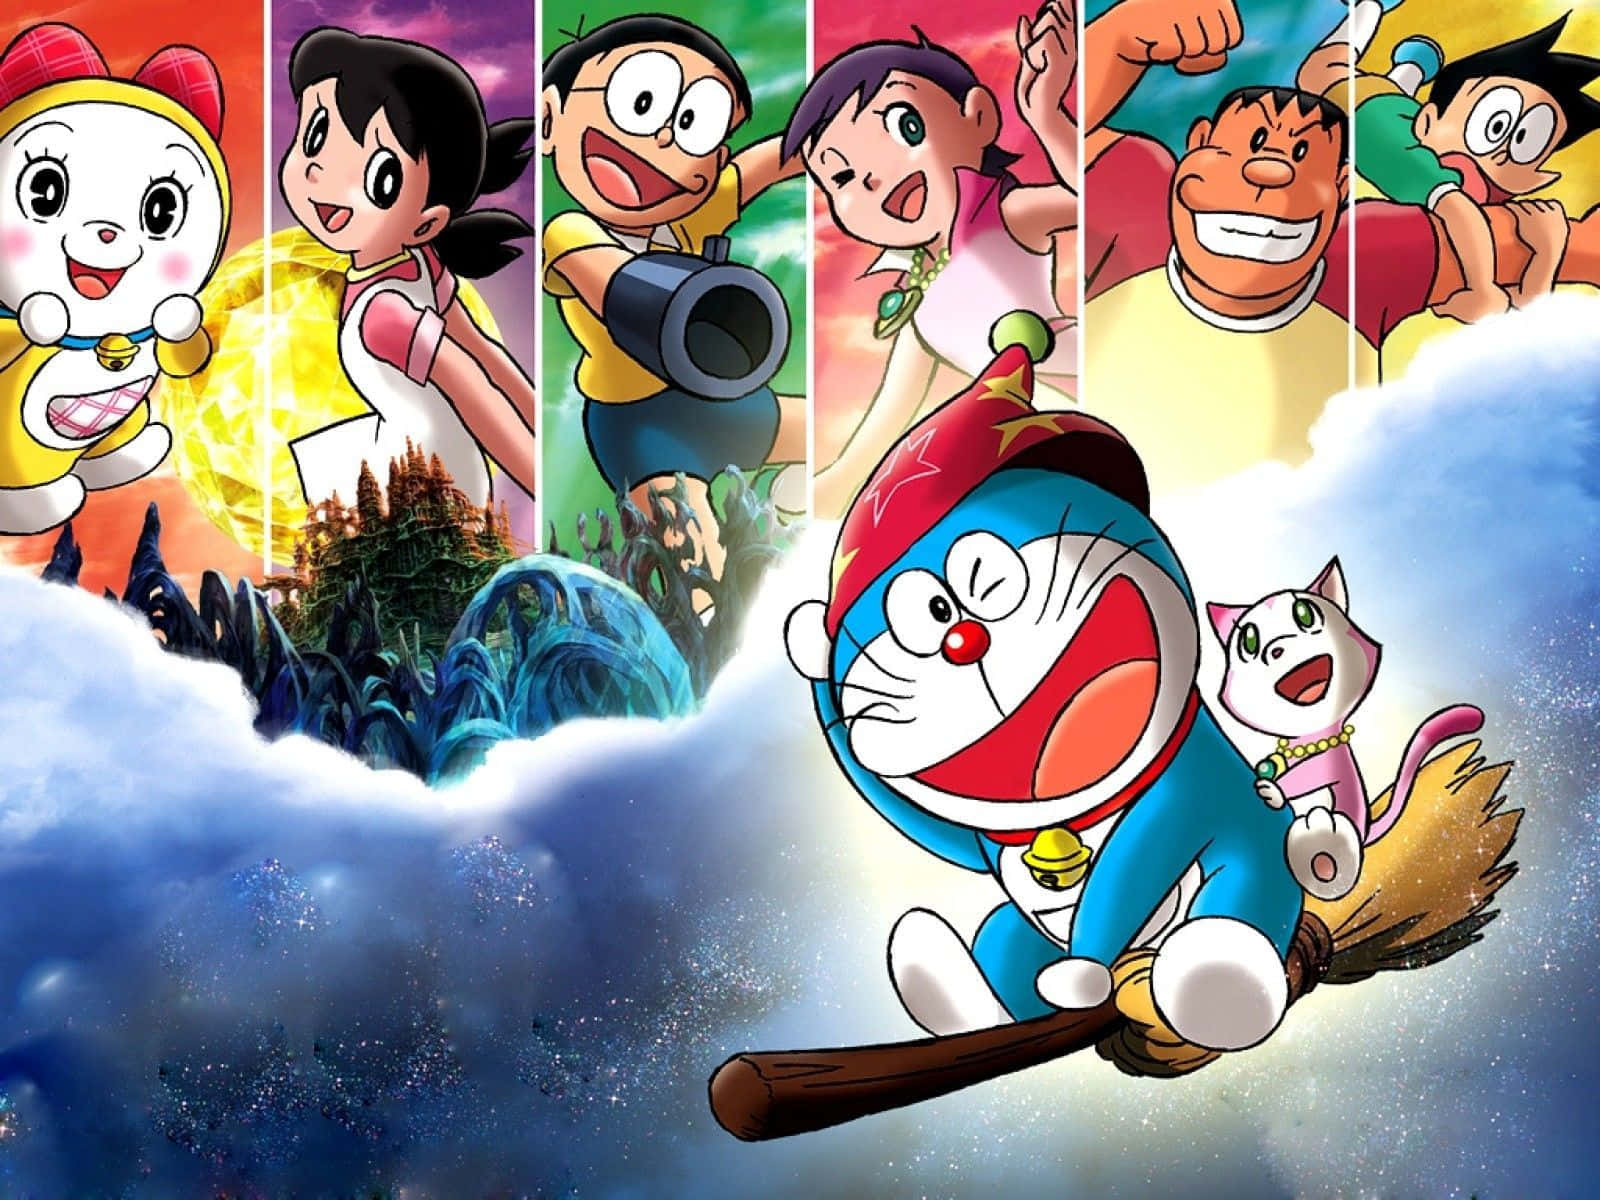 Doraemon building a fort with his friends